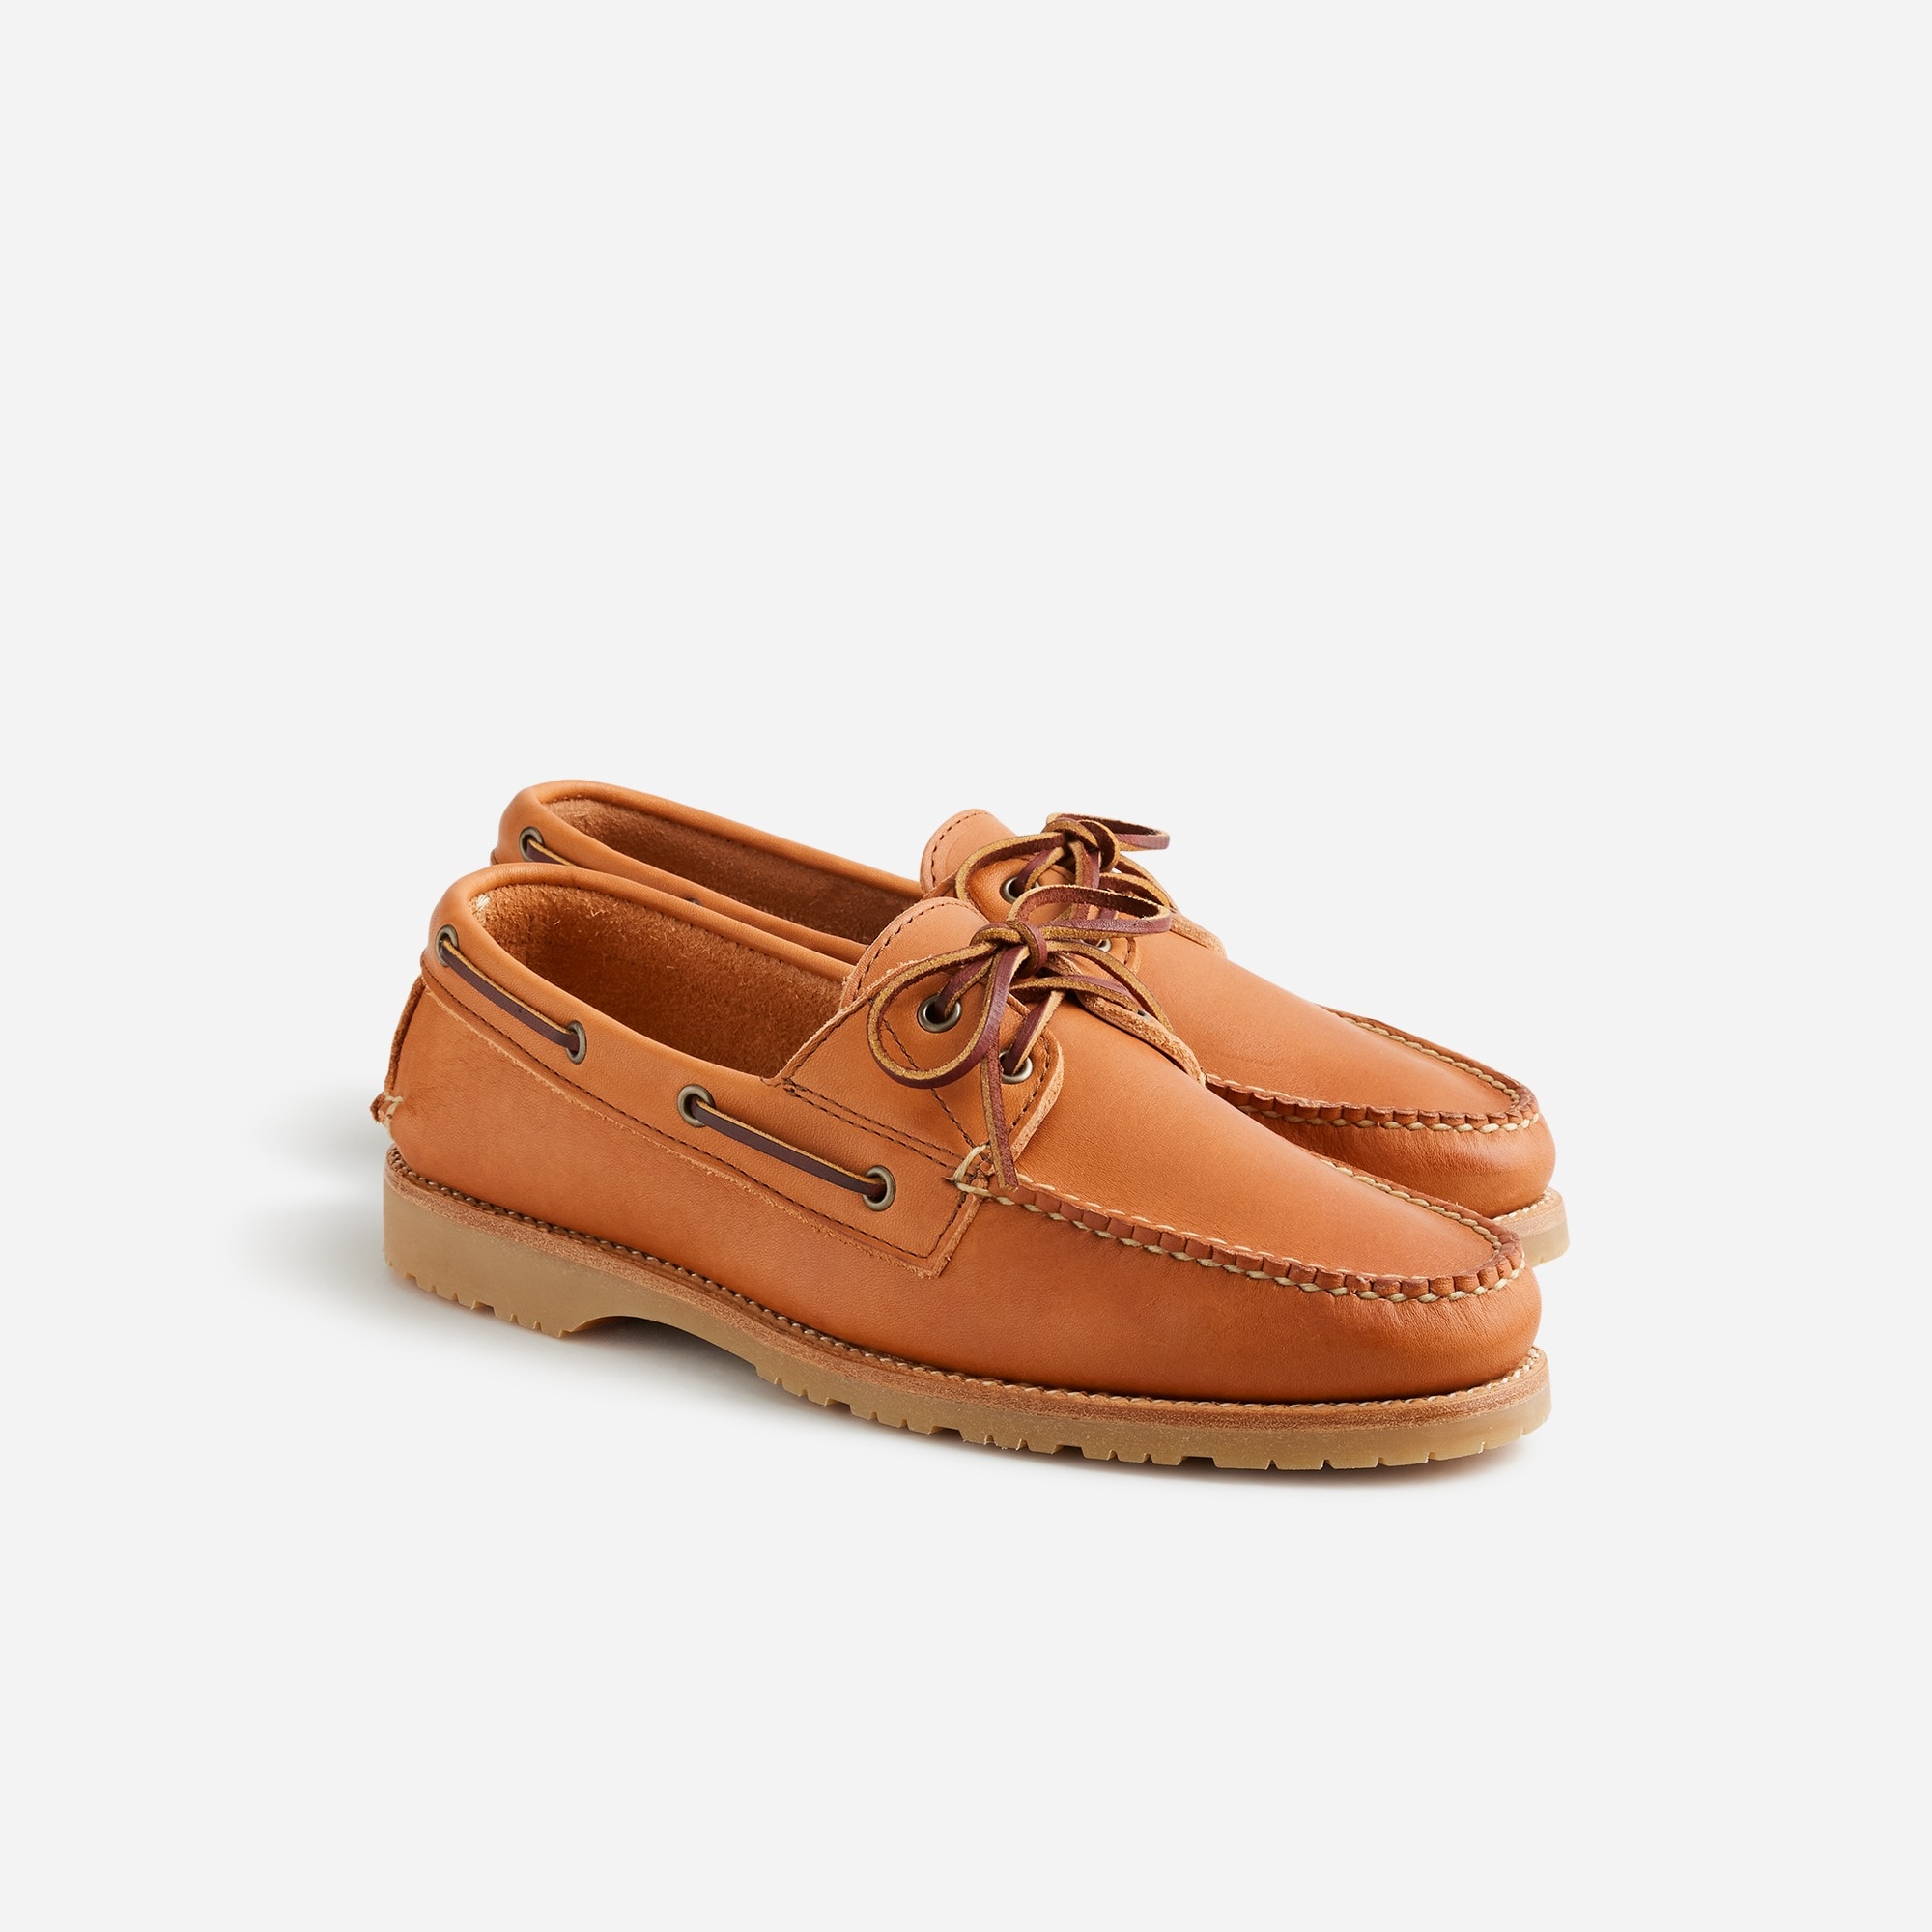  Rancourt &amp; Co. X J.Crew Read boat shoes with lug sole